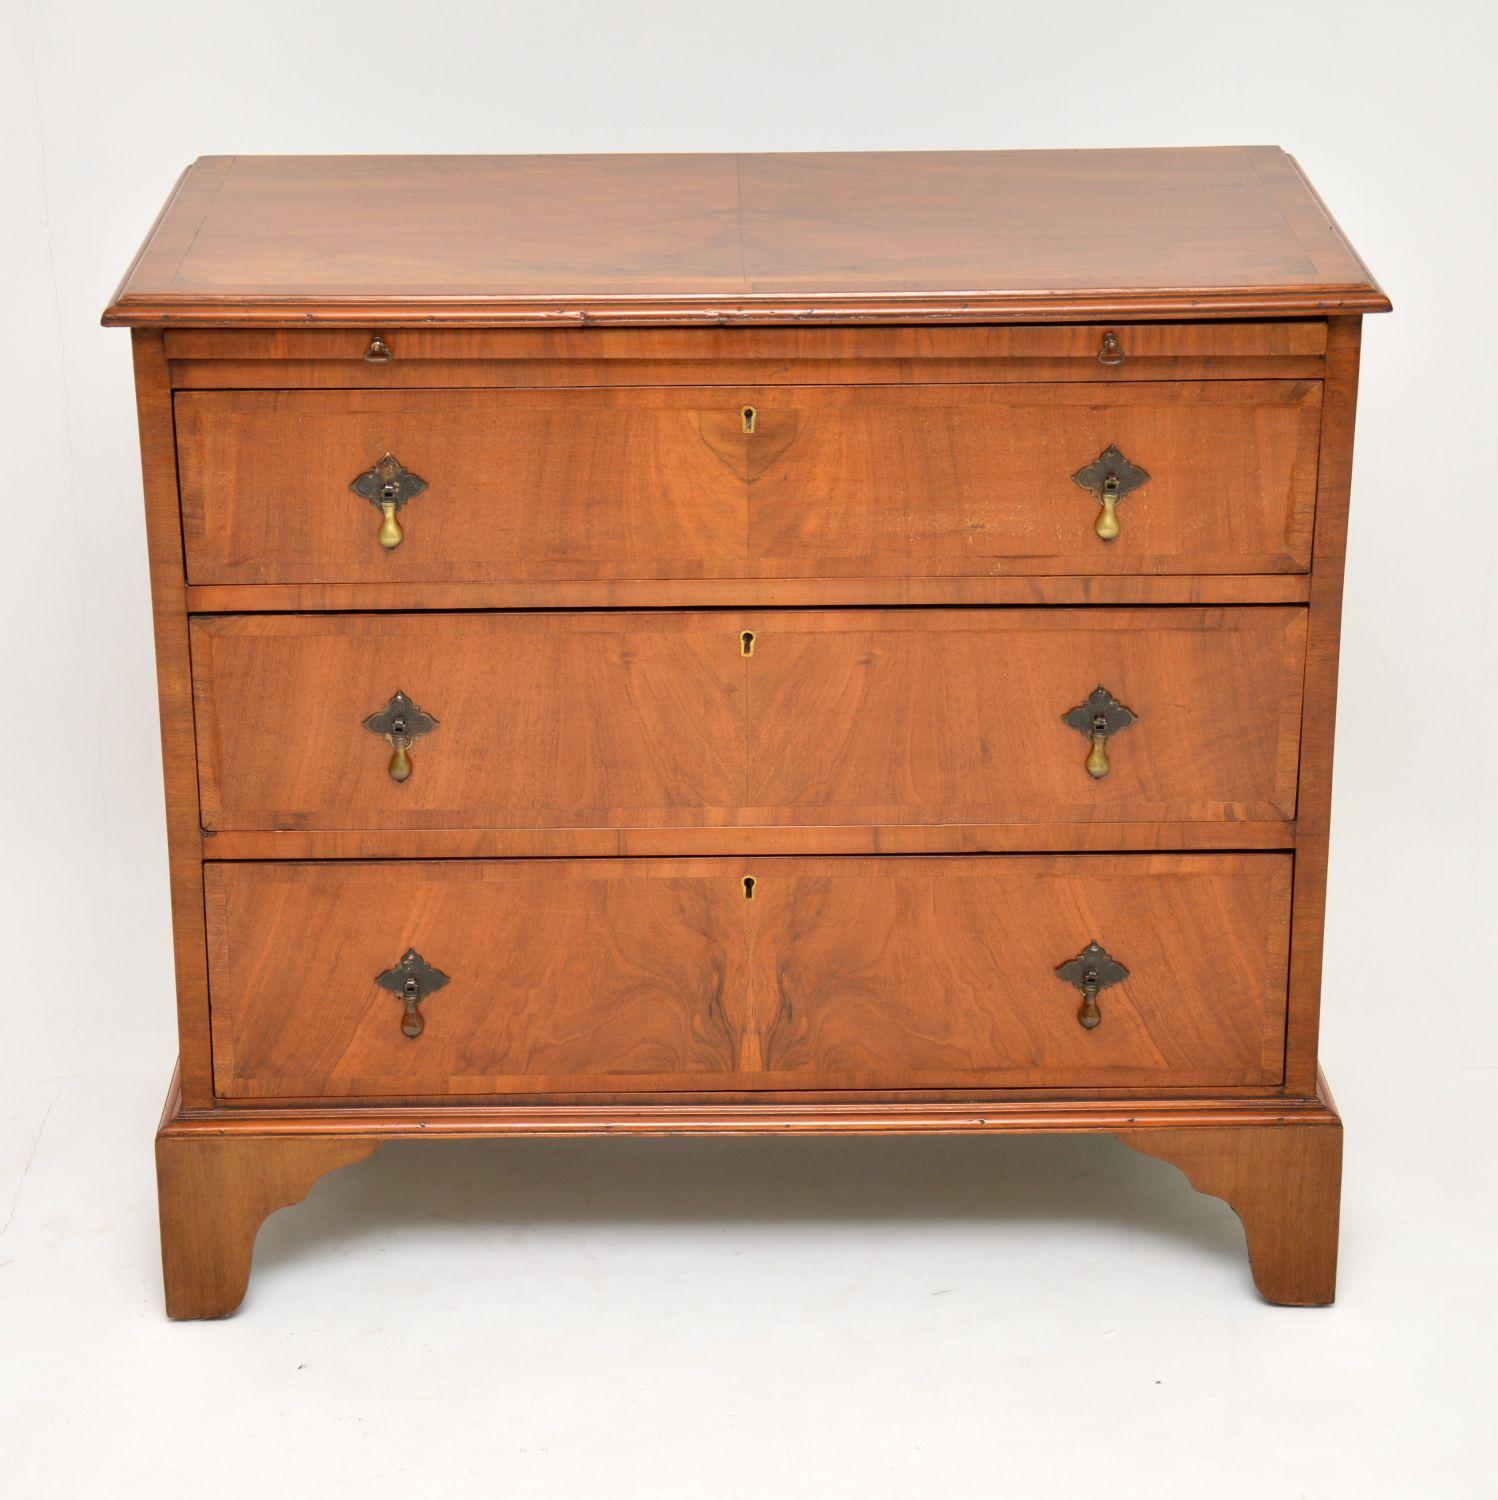 Antique burr walnut chest of drawers with a brushing slide and sitting on bracket feet, dating to circa 1910 period. It’s fine quality and has a wonderful original mellow color. The top is cross banded as are the drawers, which have original brass